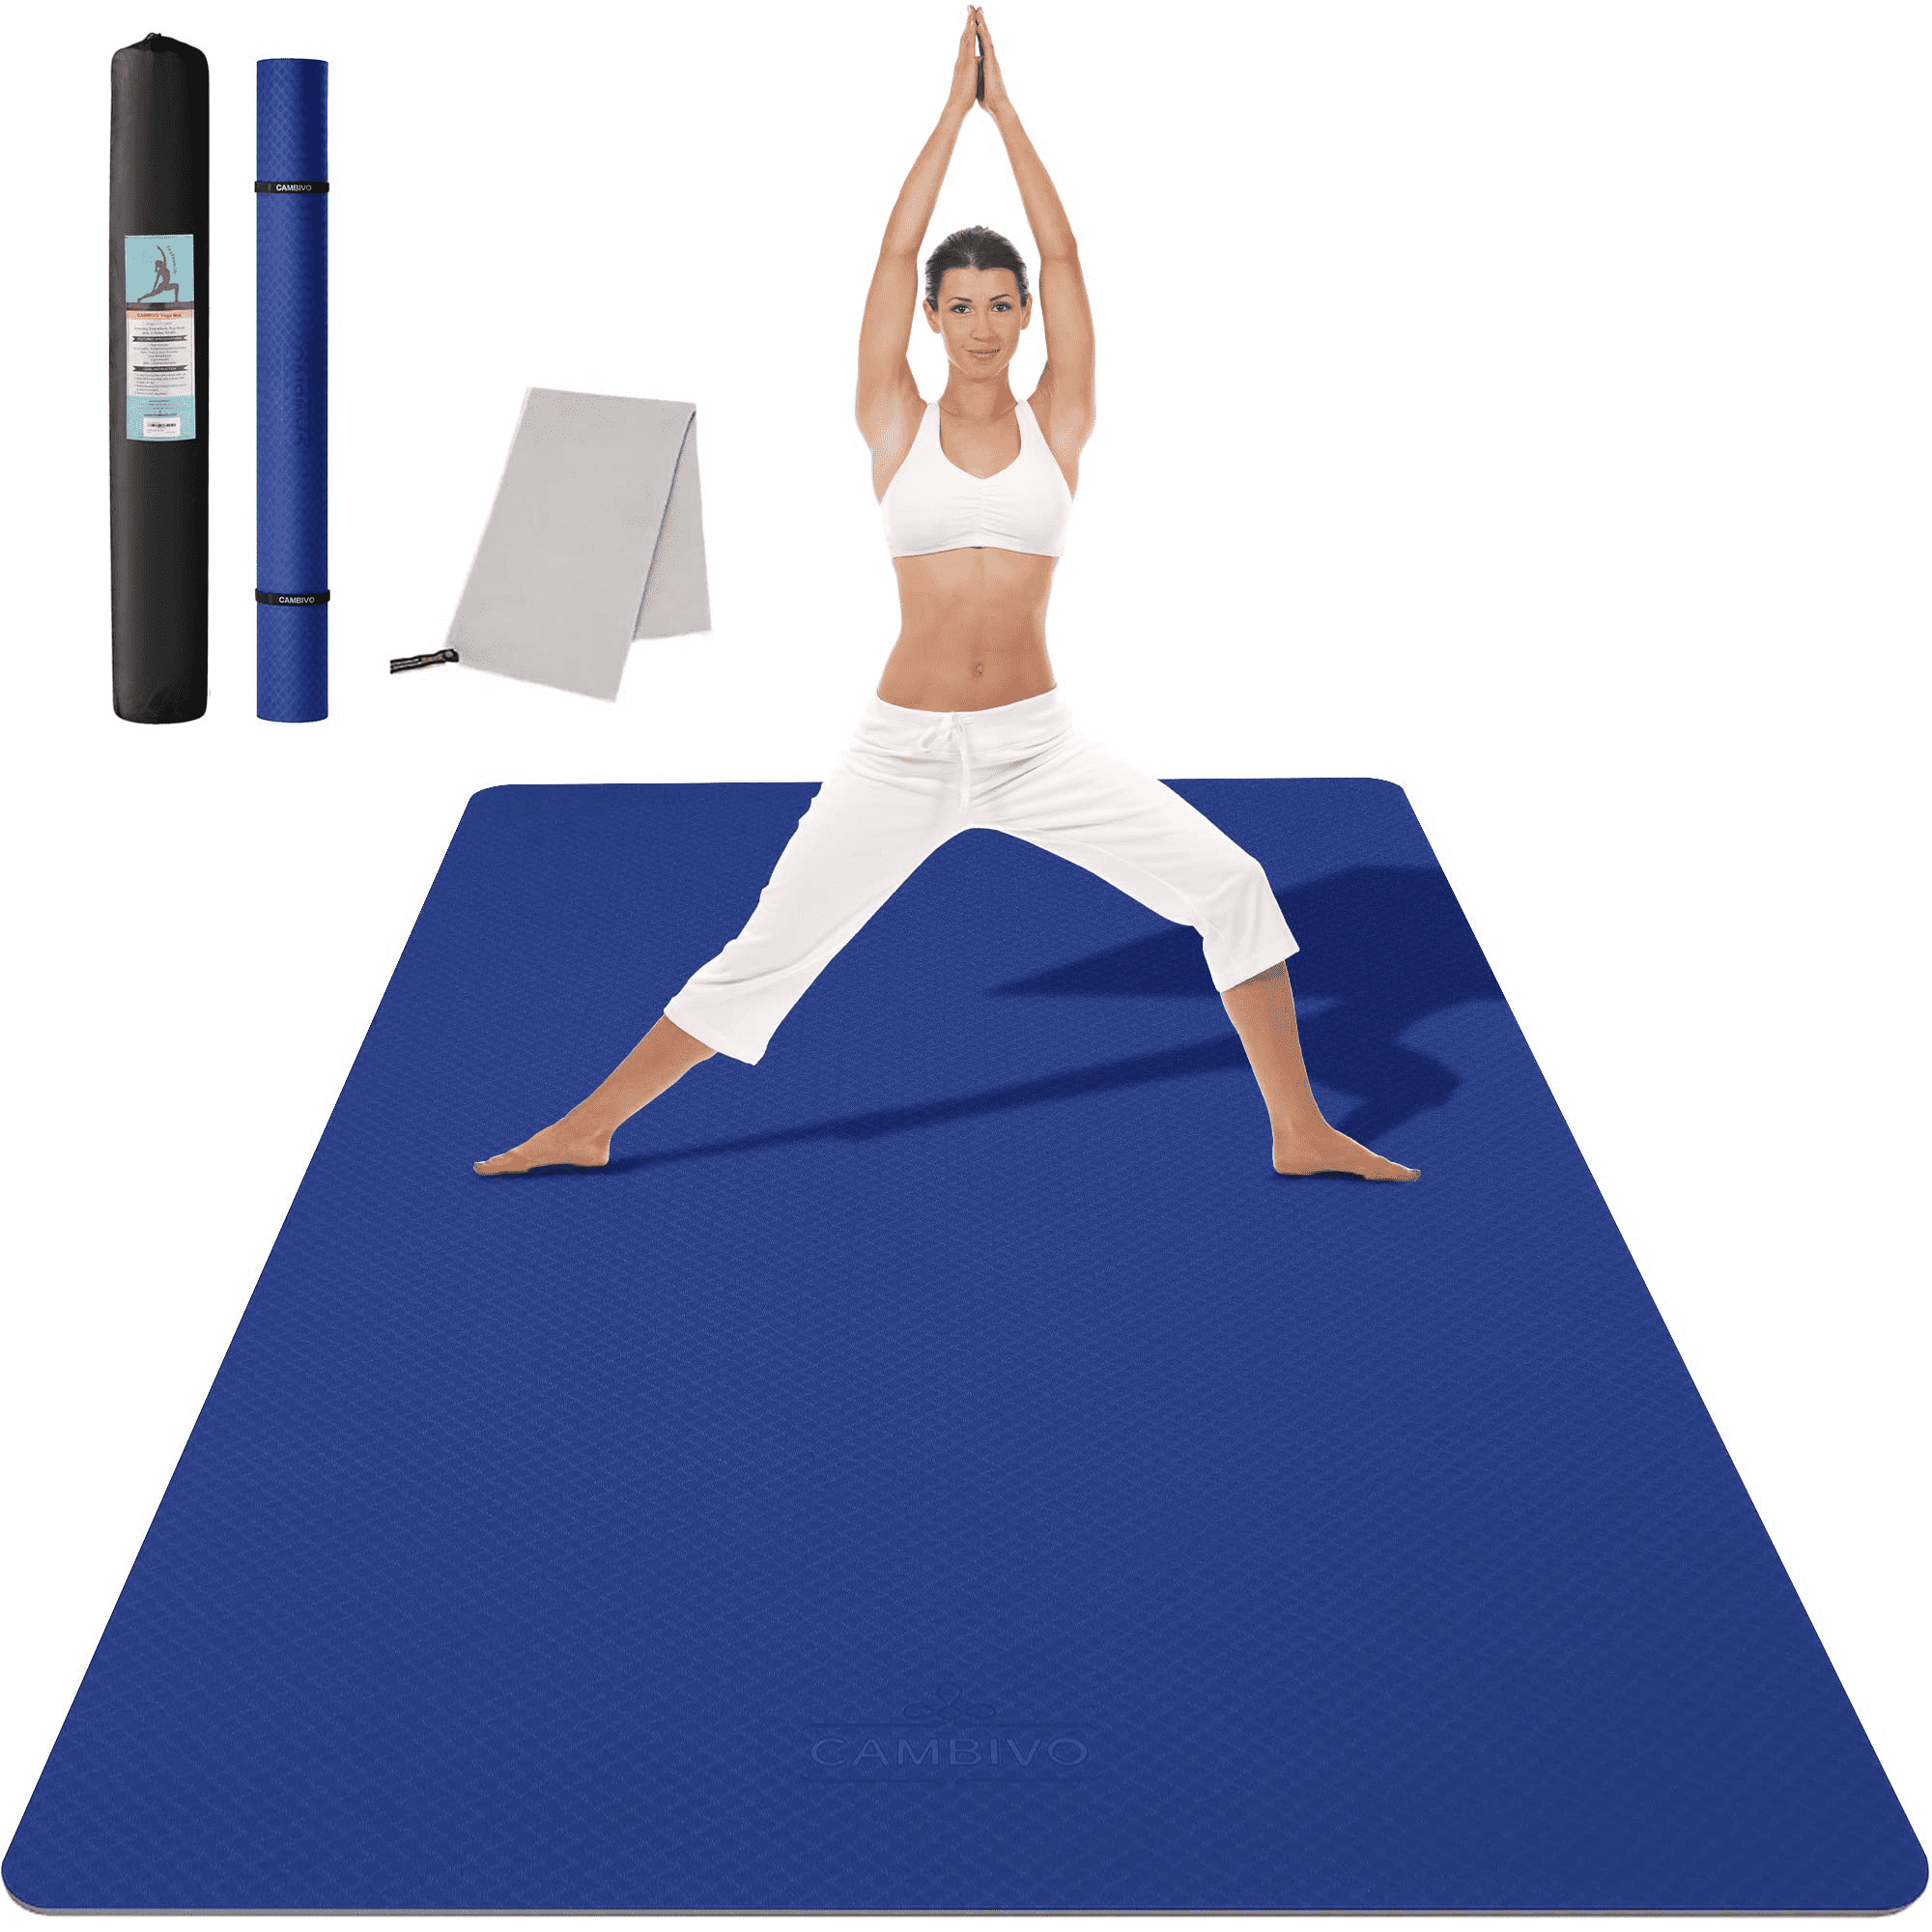 CAMBIVO Yoga Mat 6mm, 6'x 4' Extra Wide Workout Mat for Men Women, Large  Exercise Mats for Home Workout, Pilates, Black 